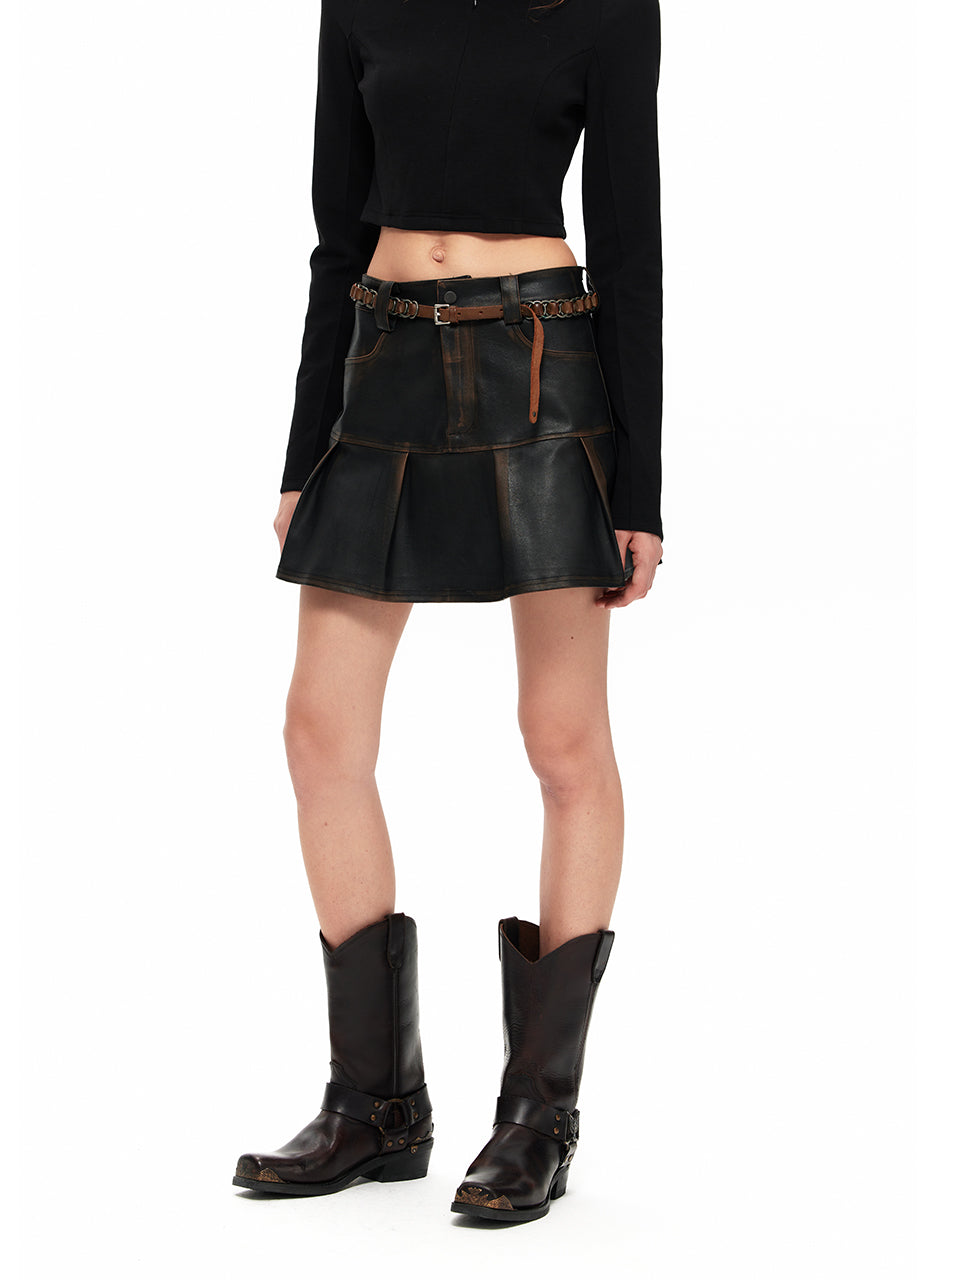 NUHT “Leather Mini Skirt” Brown Distressed Faux Leather Skirt